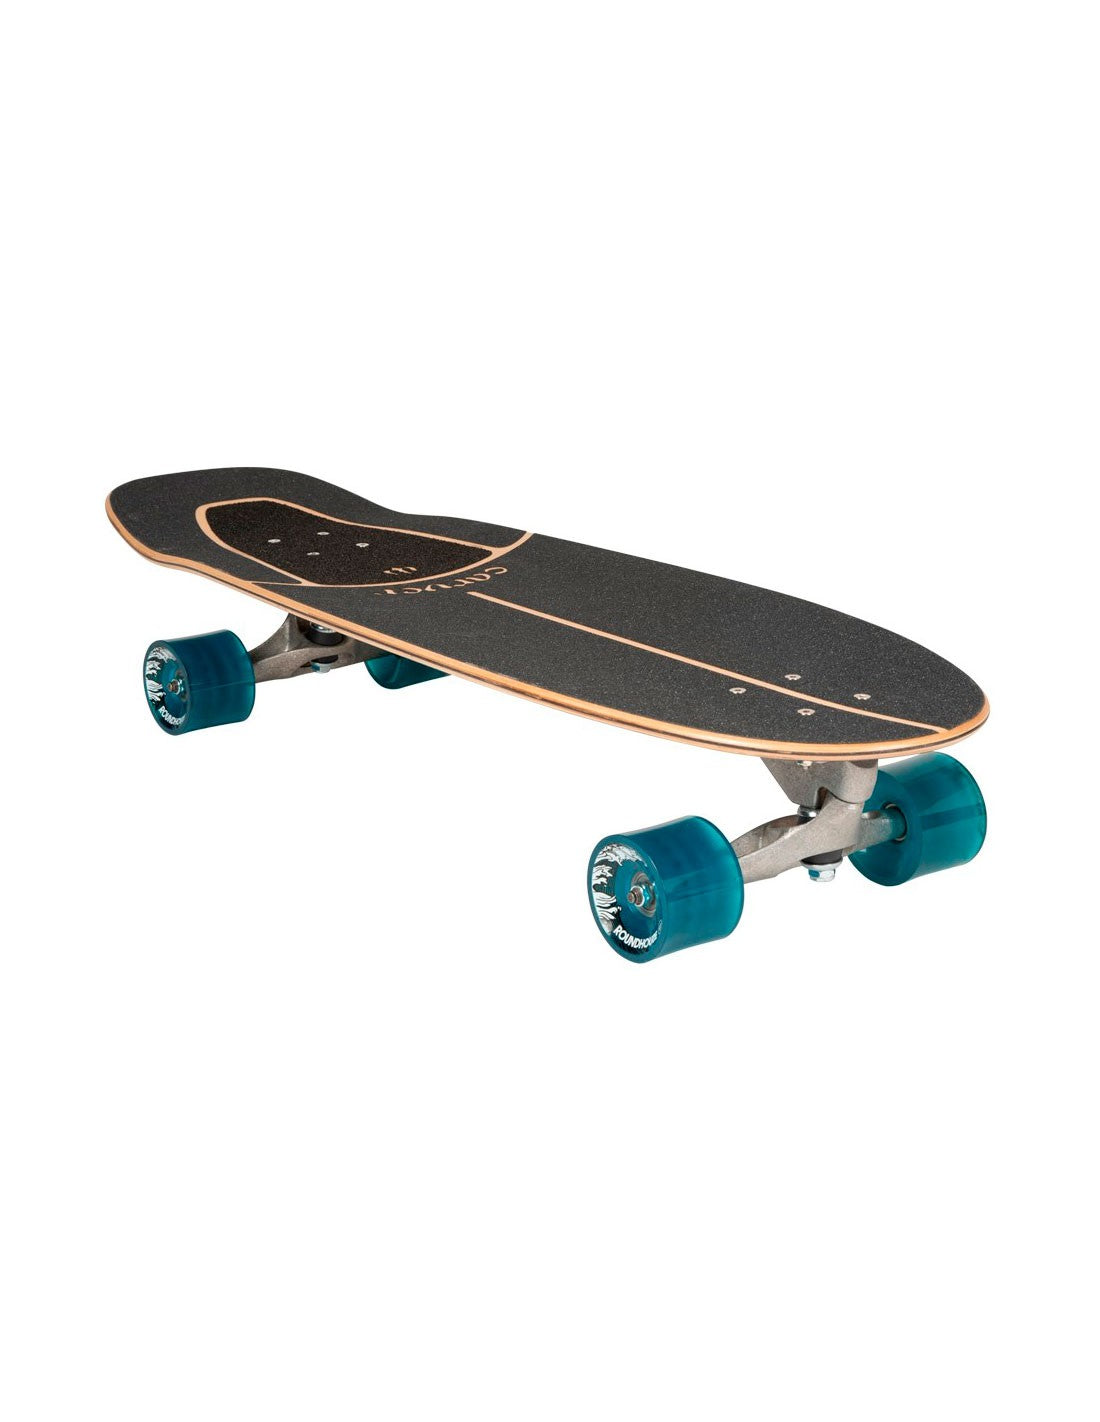 SurfSkate Carver Knox Quill CX 31,25"